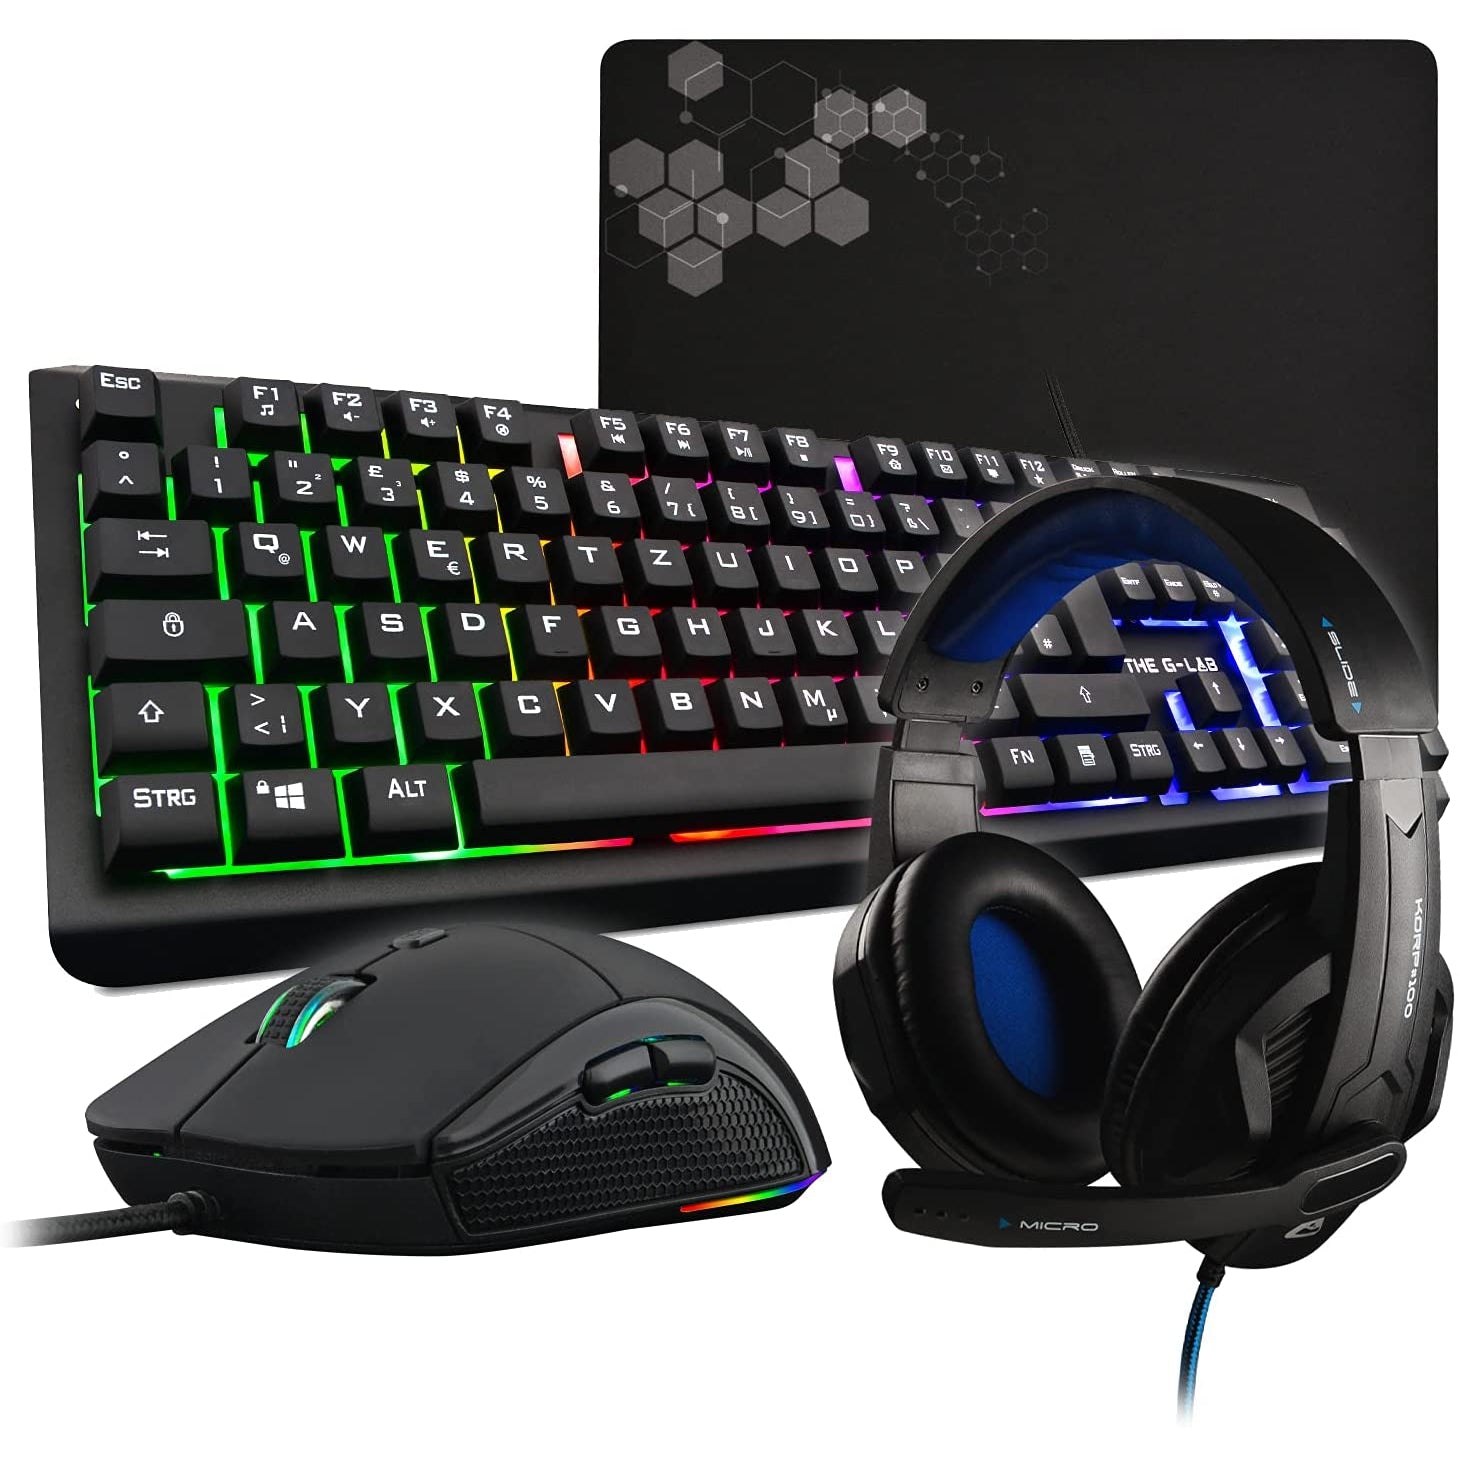 THE G-LAB Combo Selenium - 4-in-1 - Keyboard, Gaming Mouse, Headset, Mouse Pad - Excellent